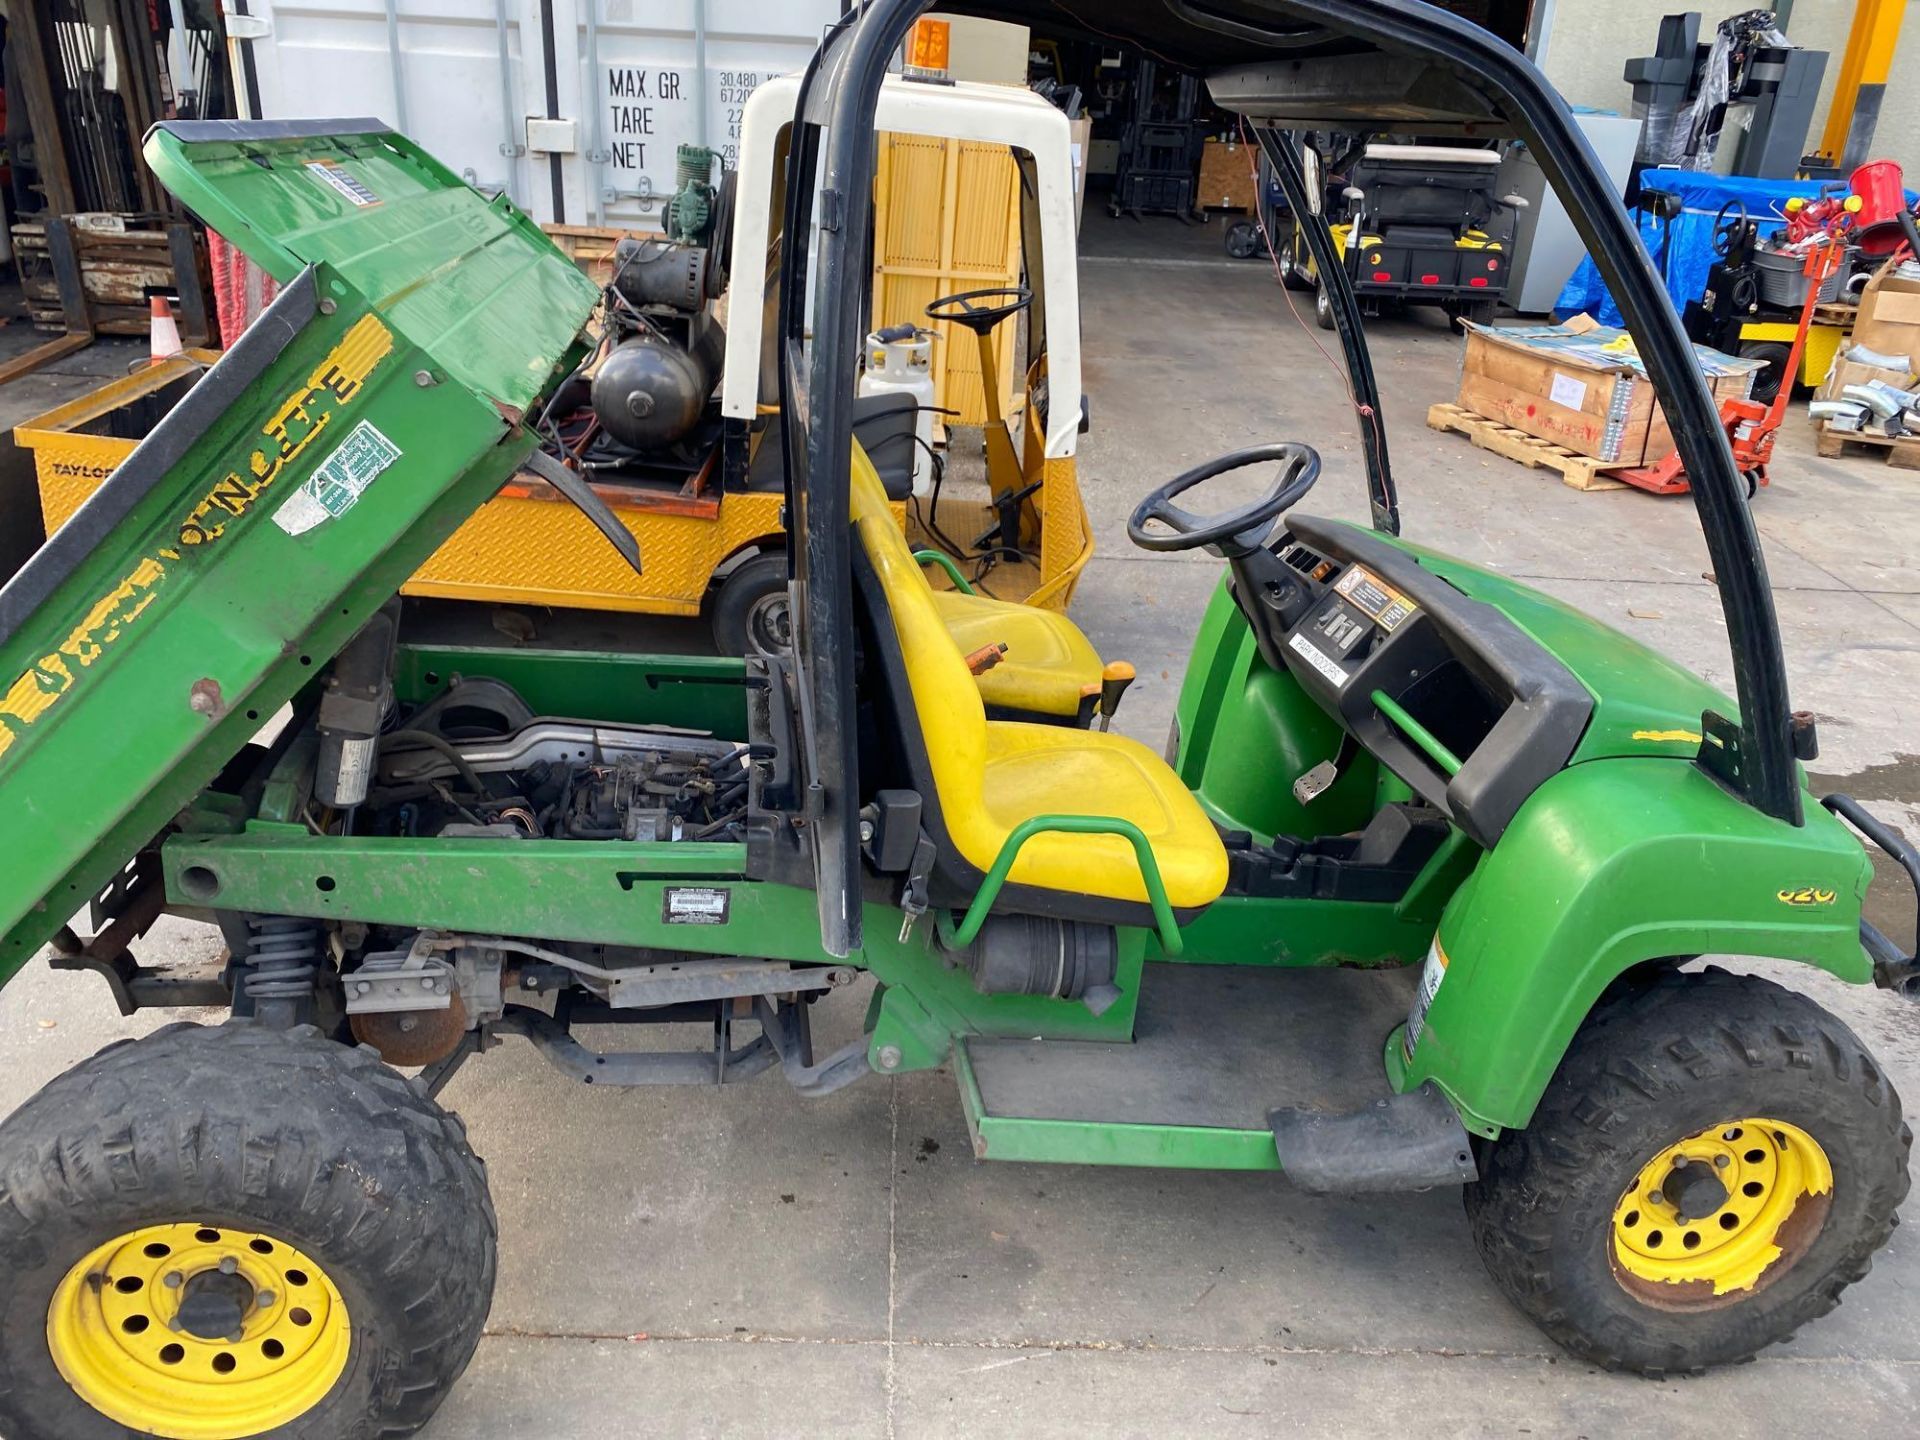 JOHN DEERE GATOR XUV UTILITY CART WITH HYDRAULIC DUMP BED, GAS POWERED, 1,713 HOURS SHOWING 4x4 - Image 7 of 9